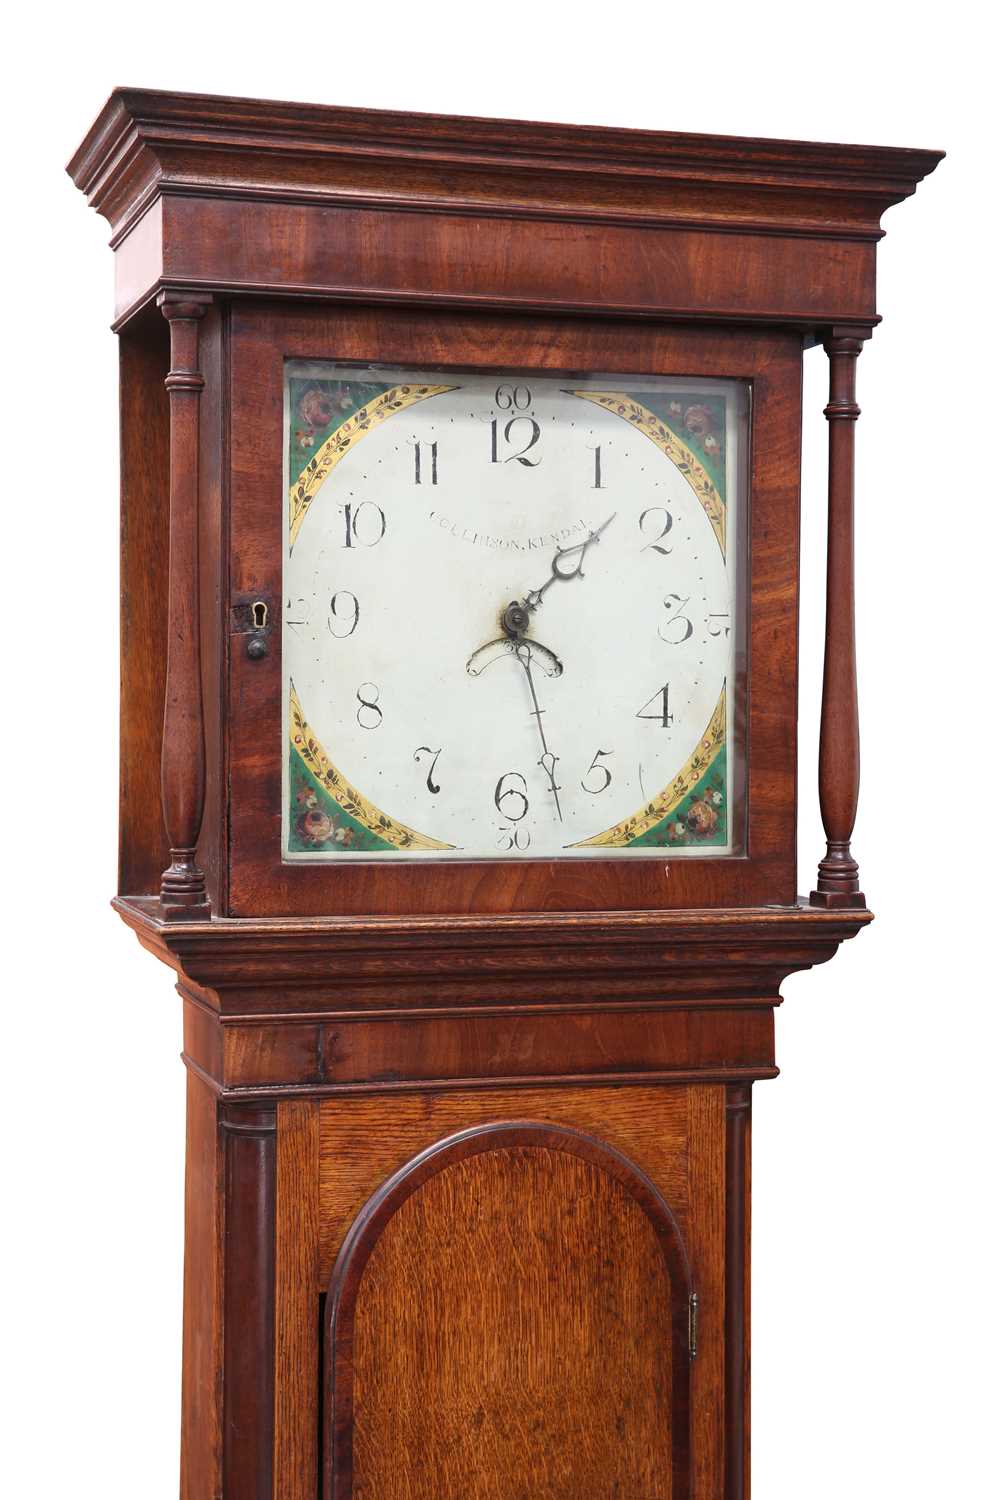 AN EARLY 19TH CENTURY OAK AND MAHOGANY 30-HOUR LONGCASE CLOCK, SIGNED COLLINSON, KENDAL - Image 2 of 2